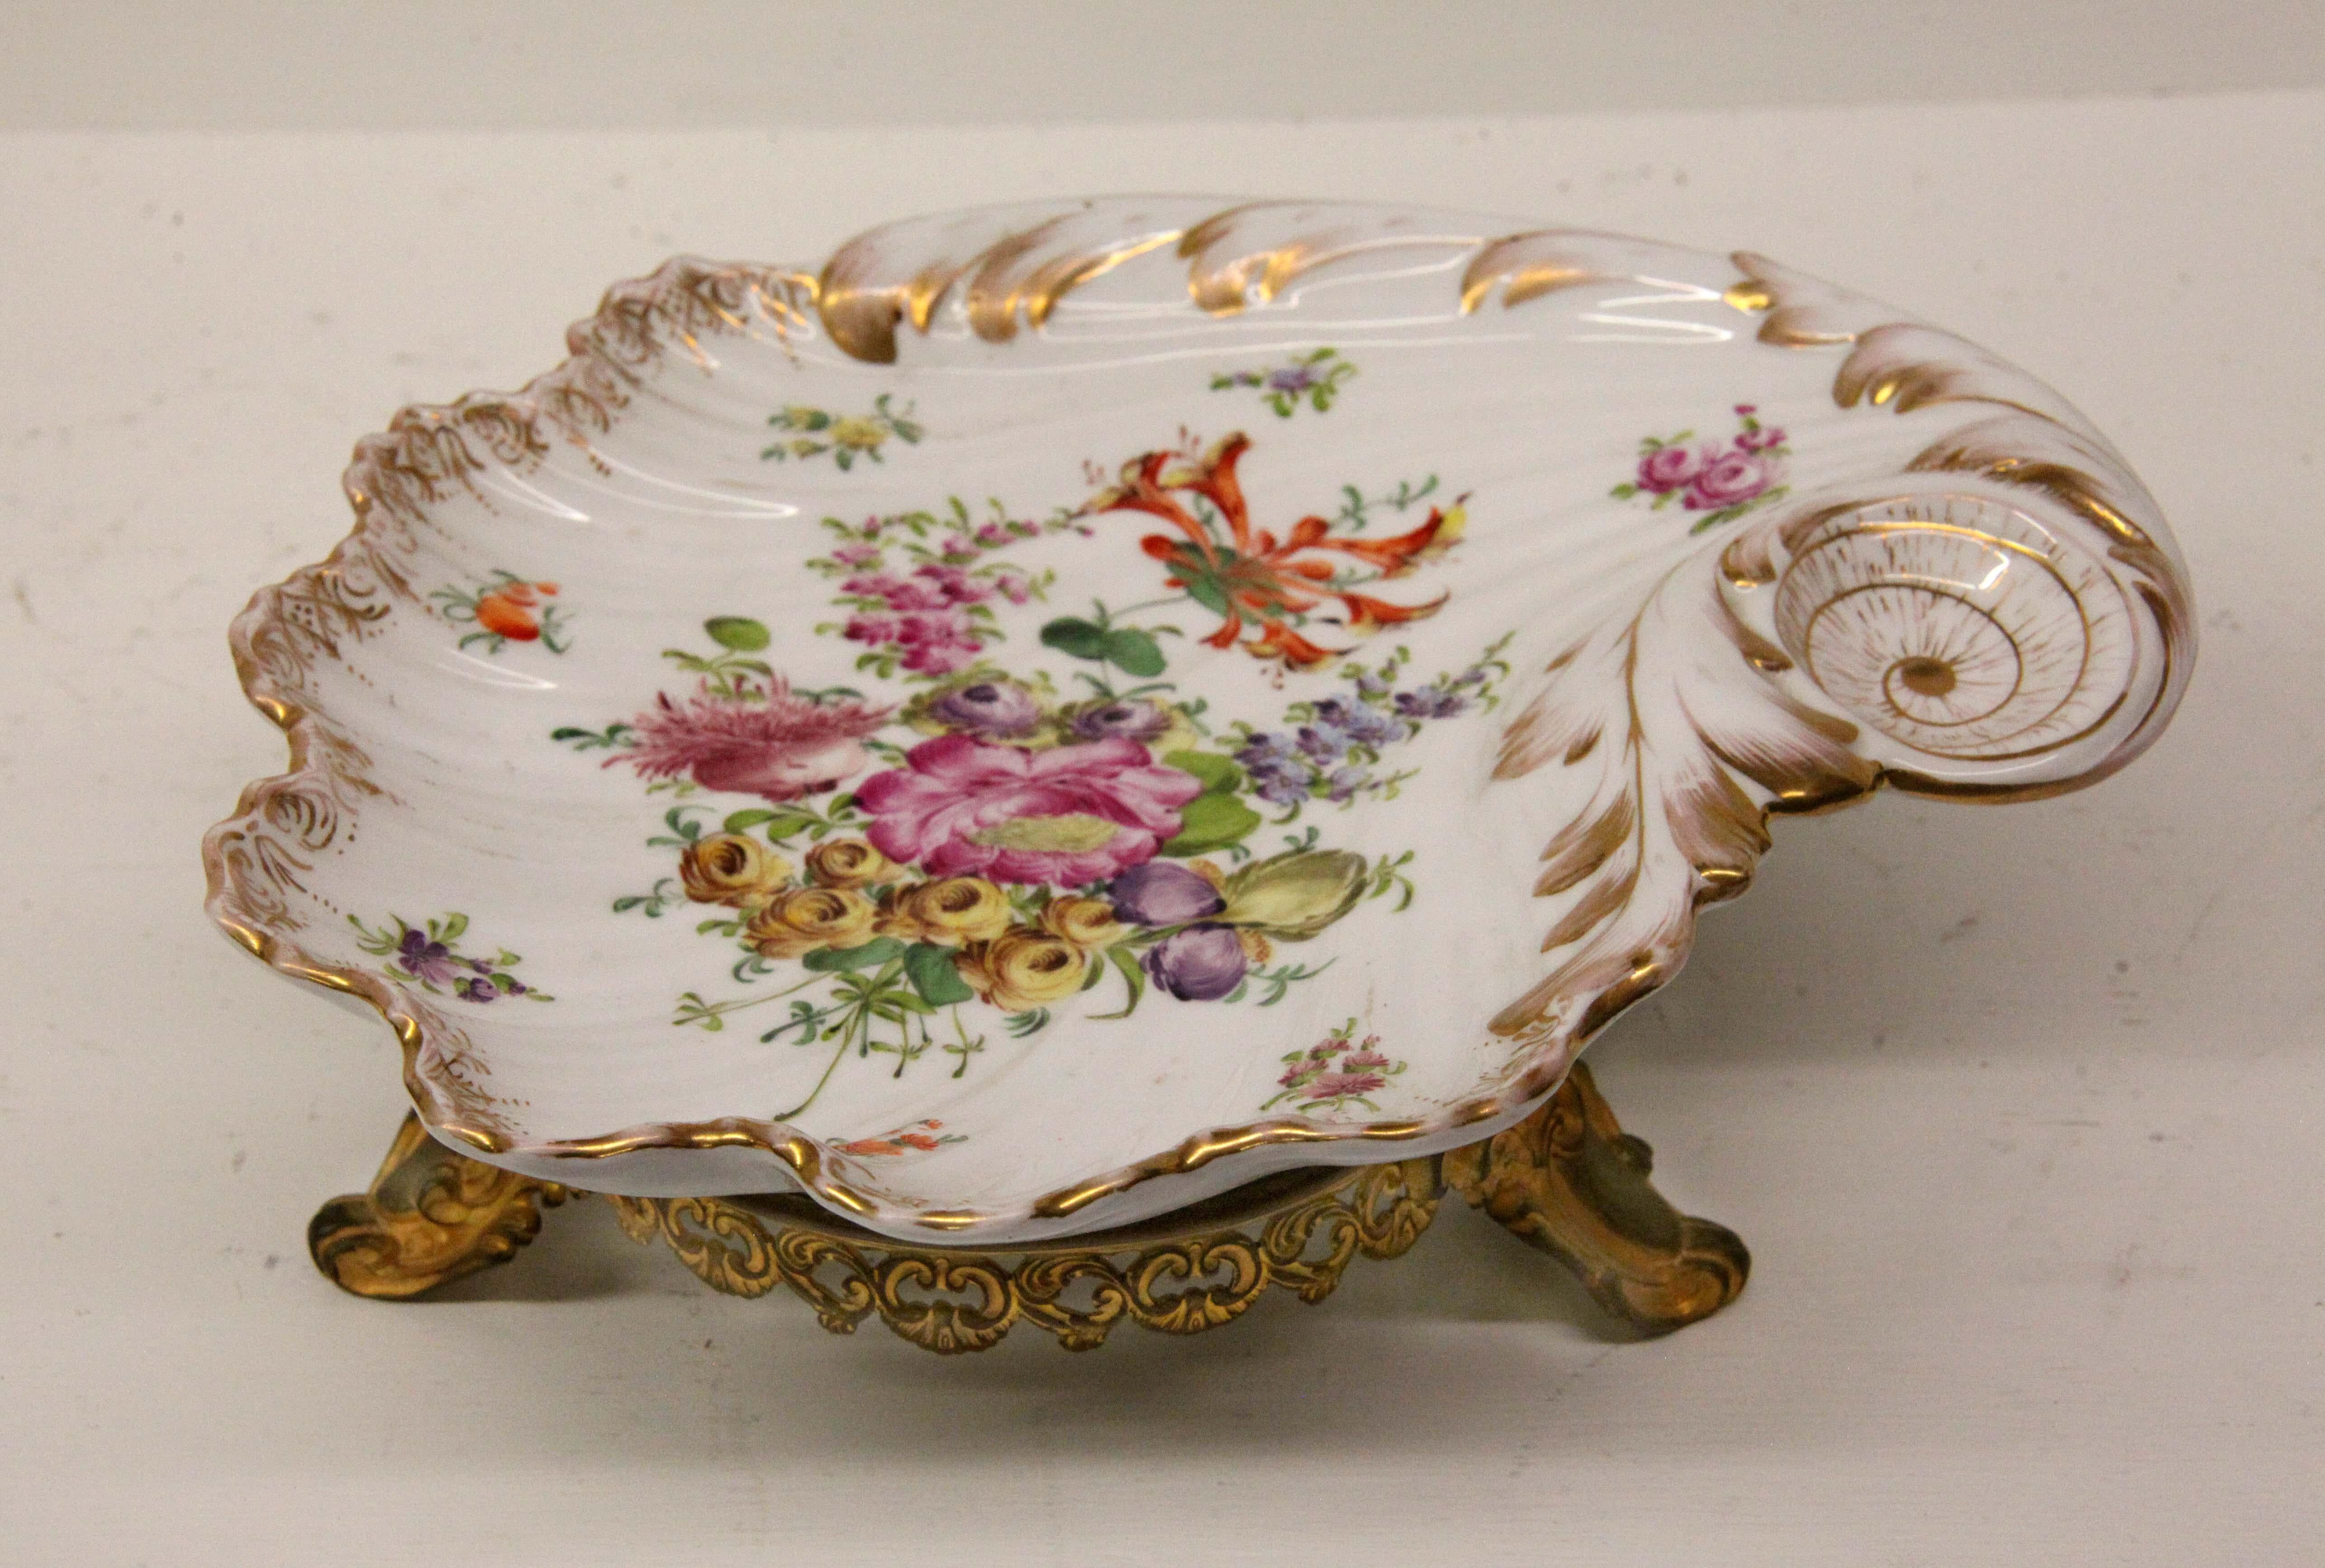 Dresden serving dish with gilt base, with scalloped edge and shallow well surrounding the center of flowers and foliate work, the attached gilt brass base with intricately reticulated apron and scroll feet.